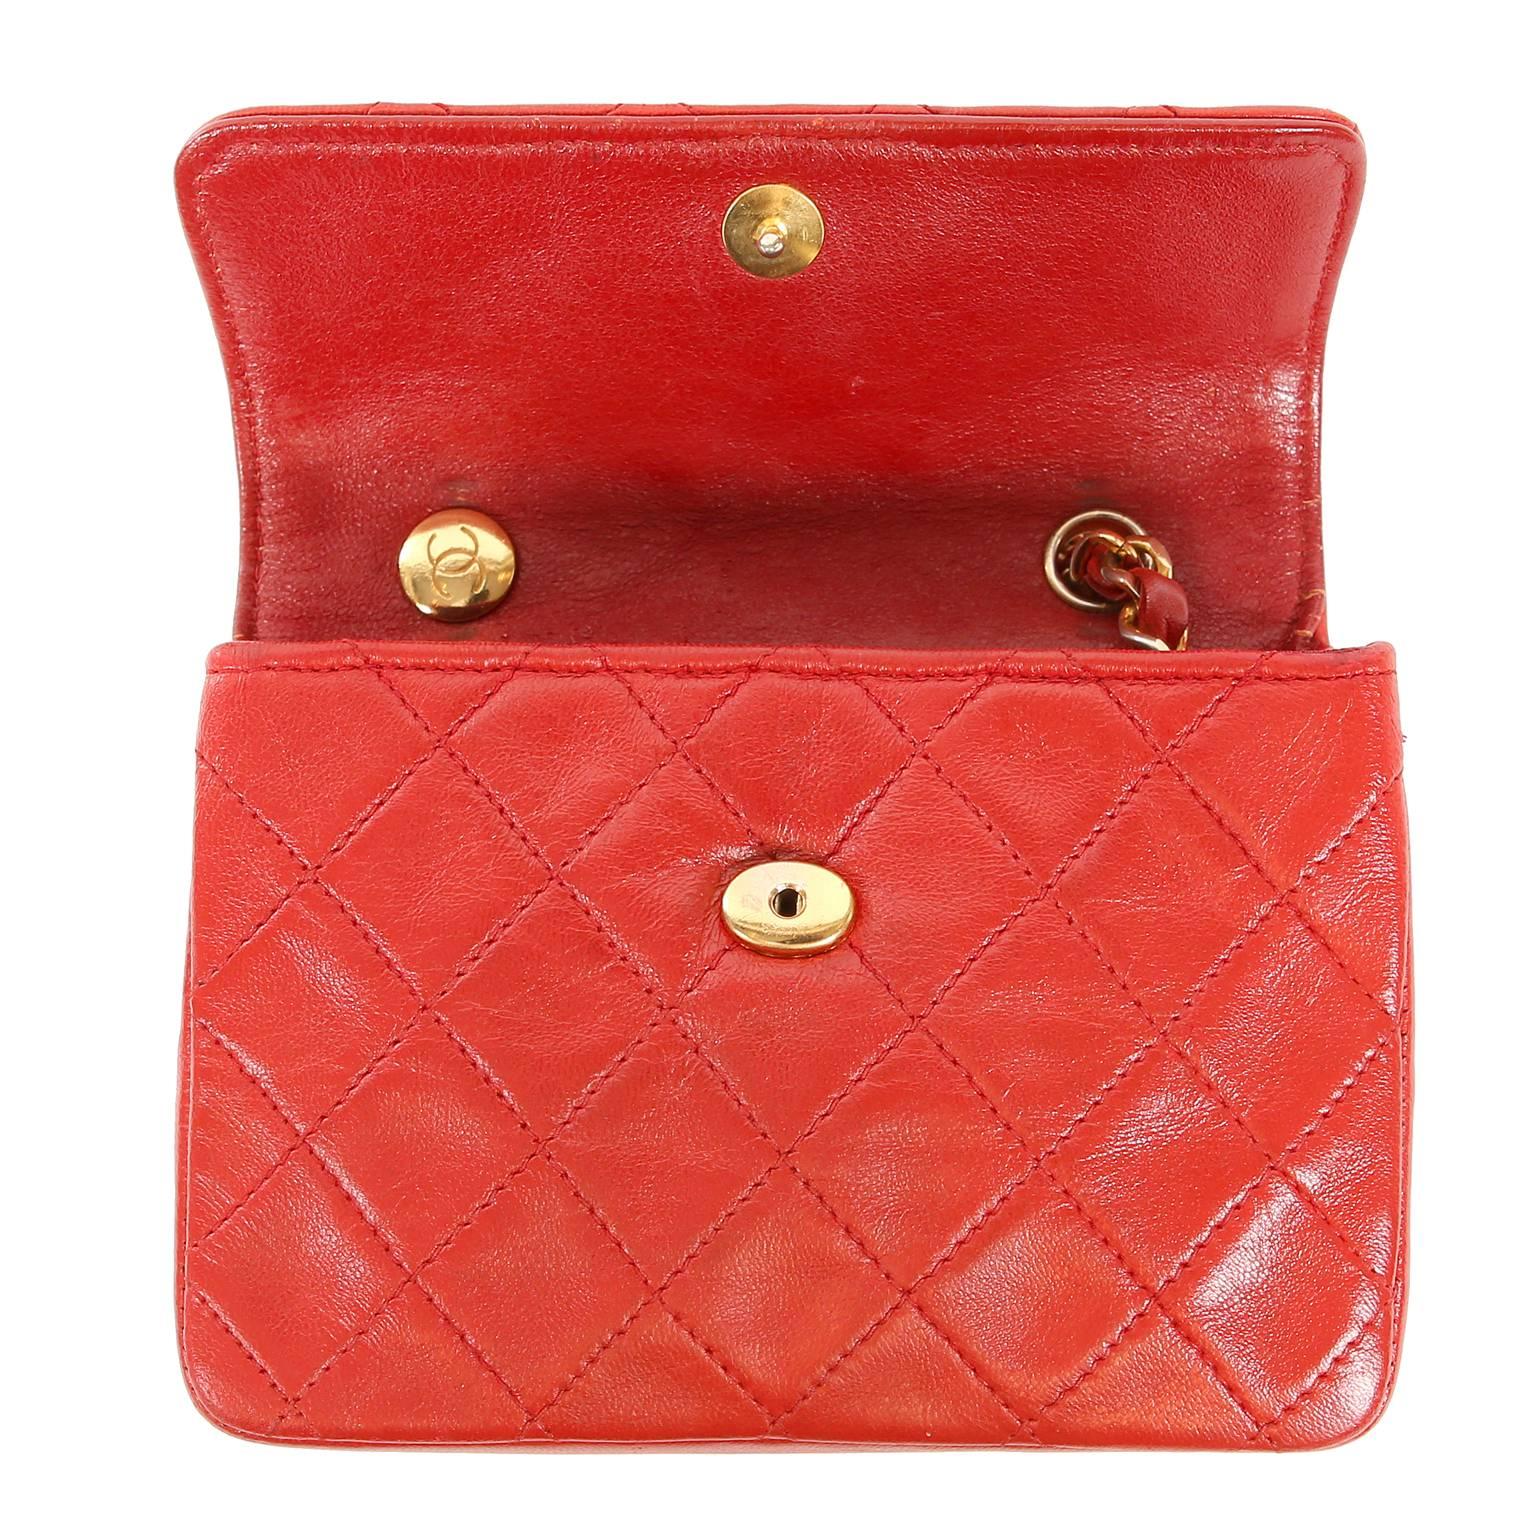 Chanel Red Leather Mini Classic Flap Bag 3